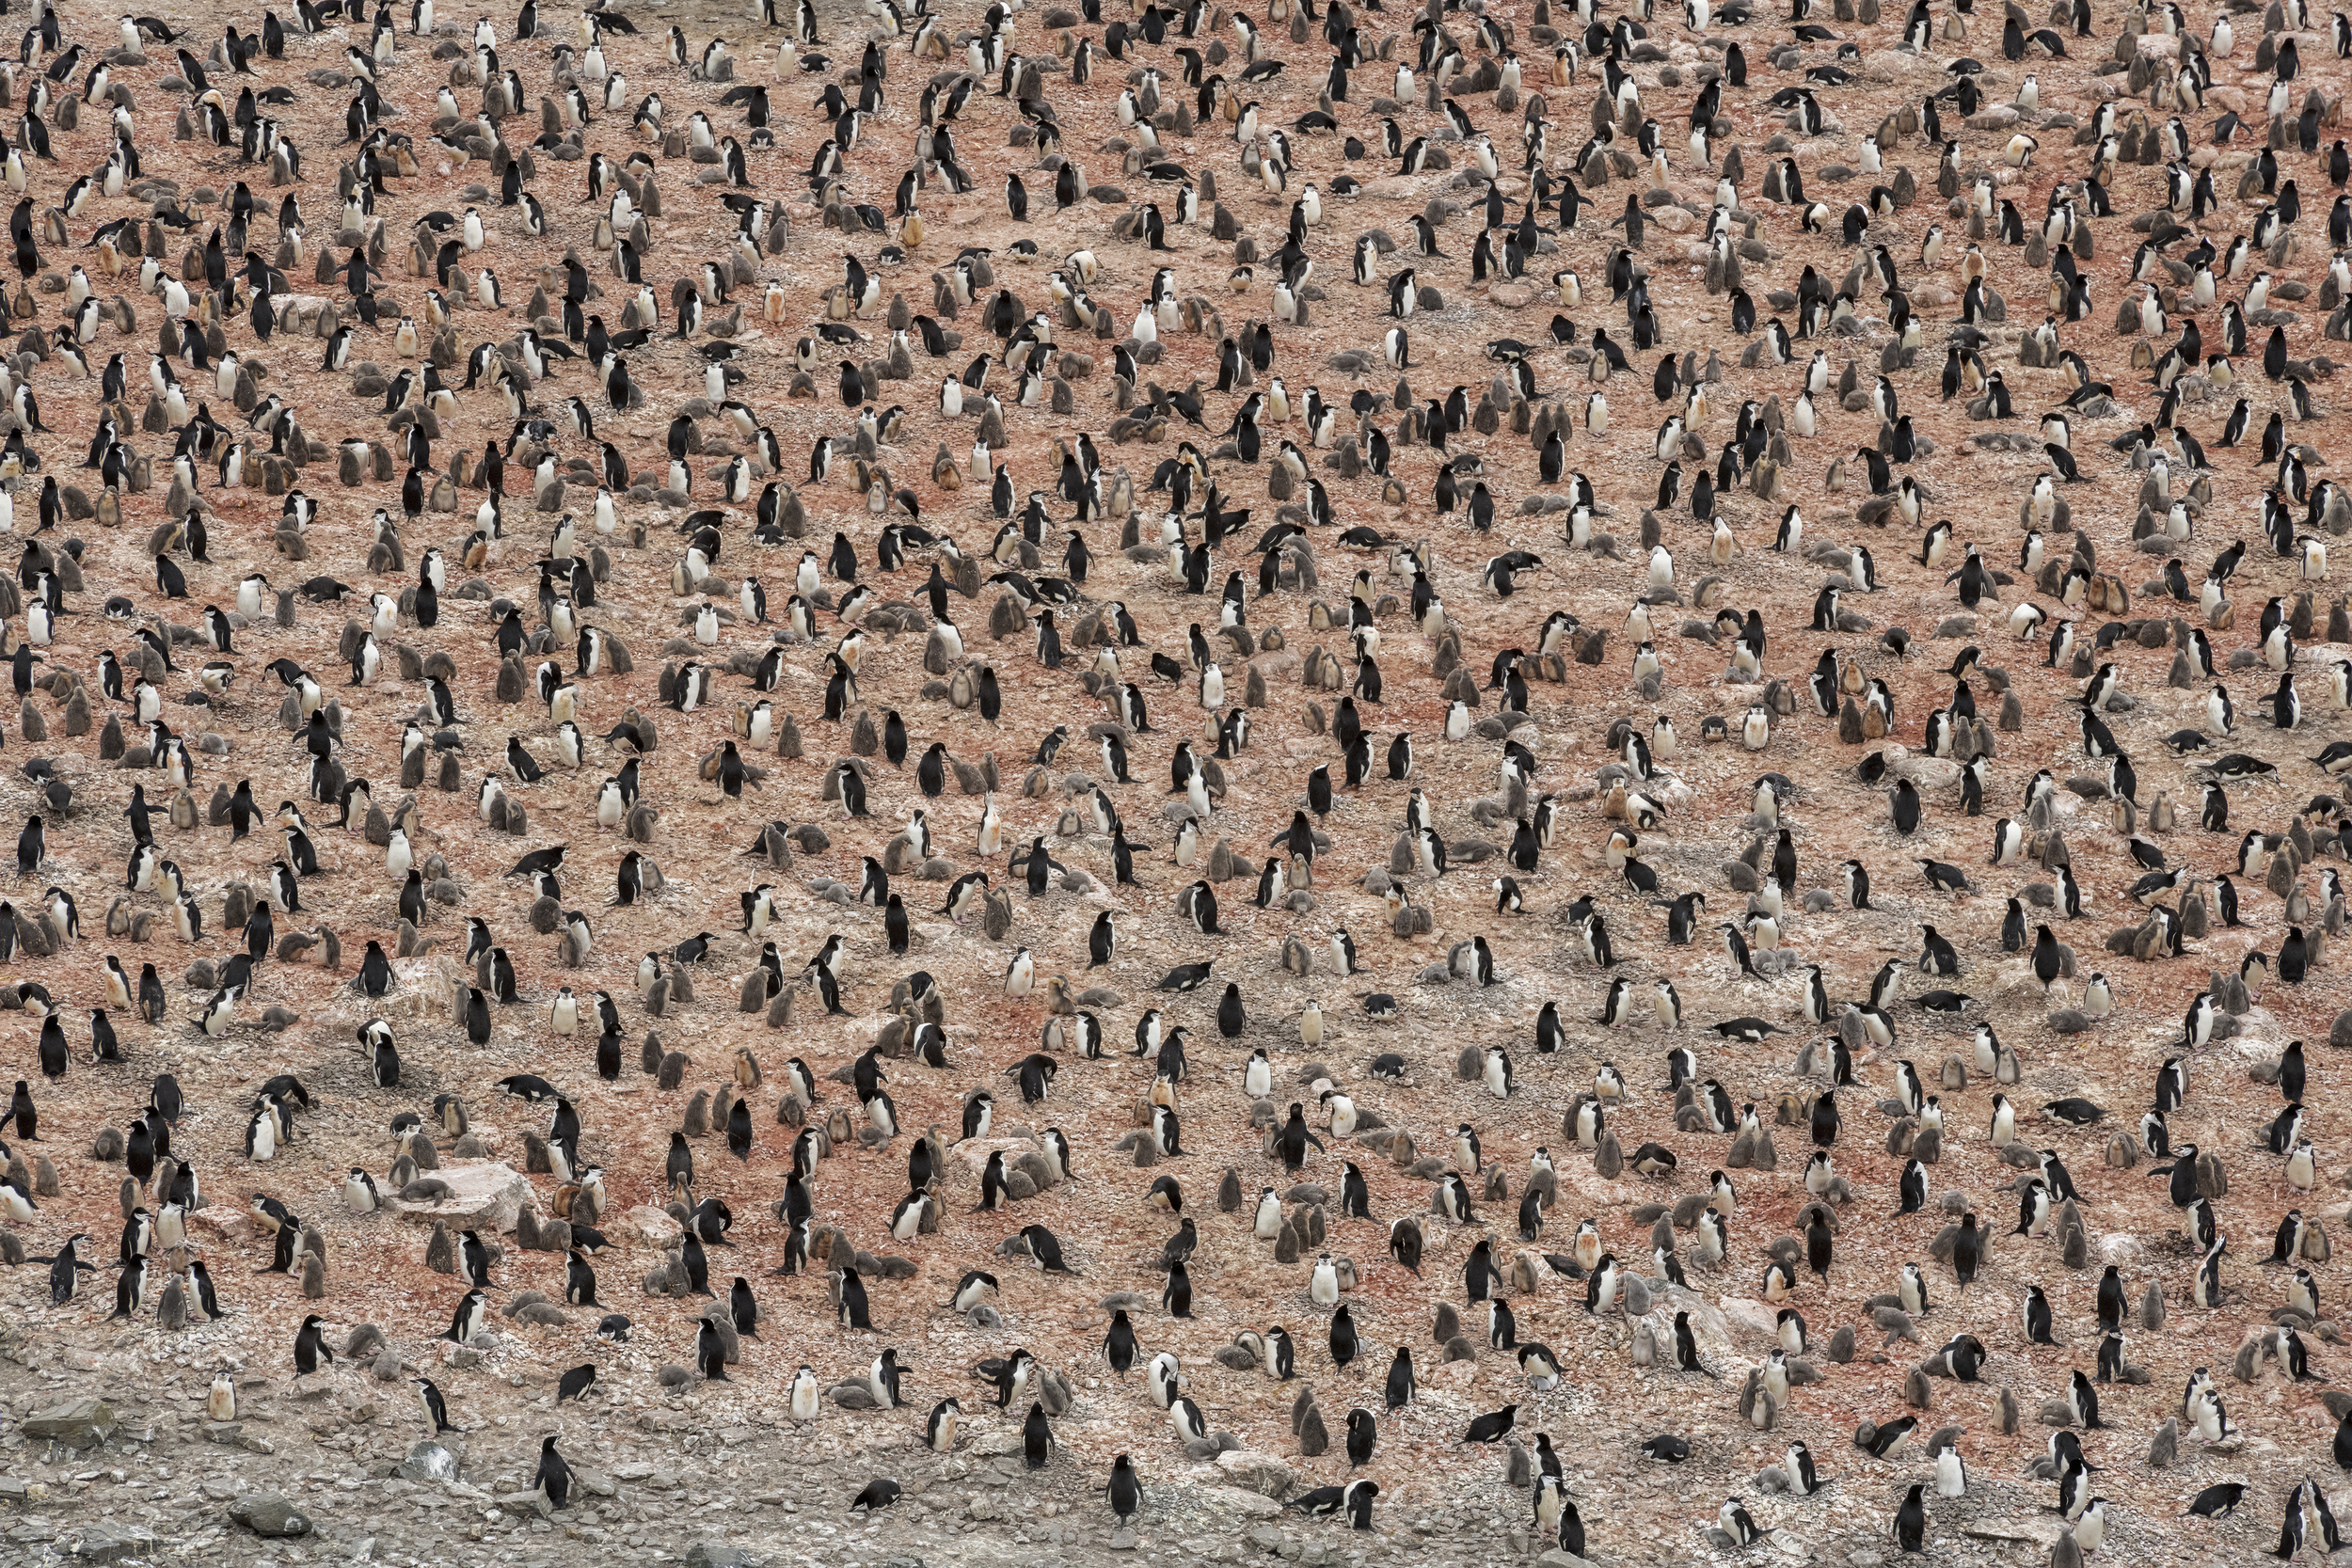 Aerial view of a penguin colony. Hundreds of penguins fill the frame.